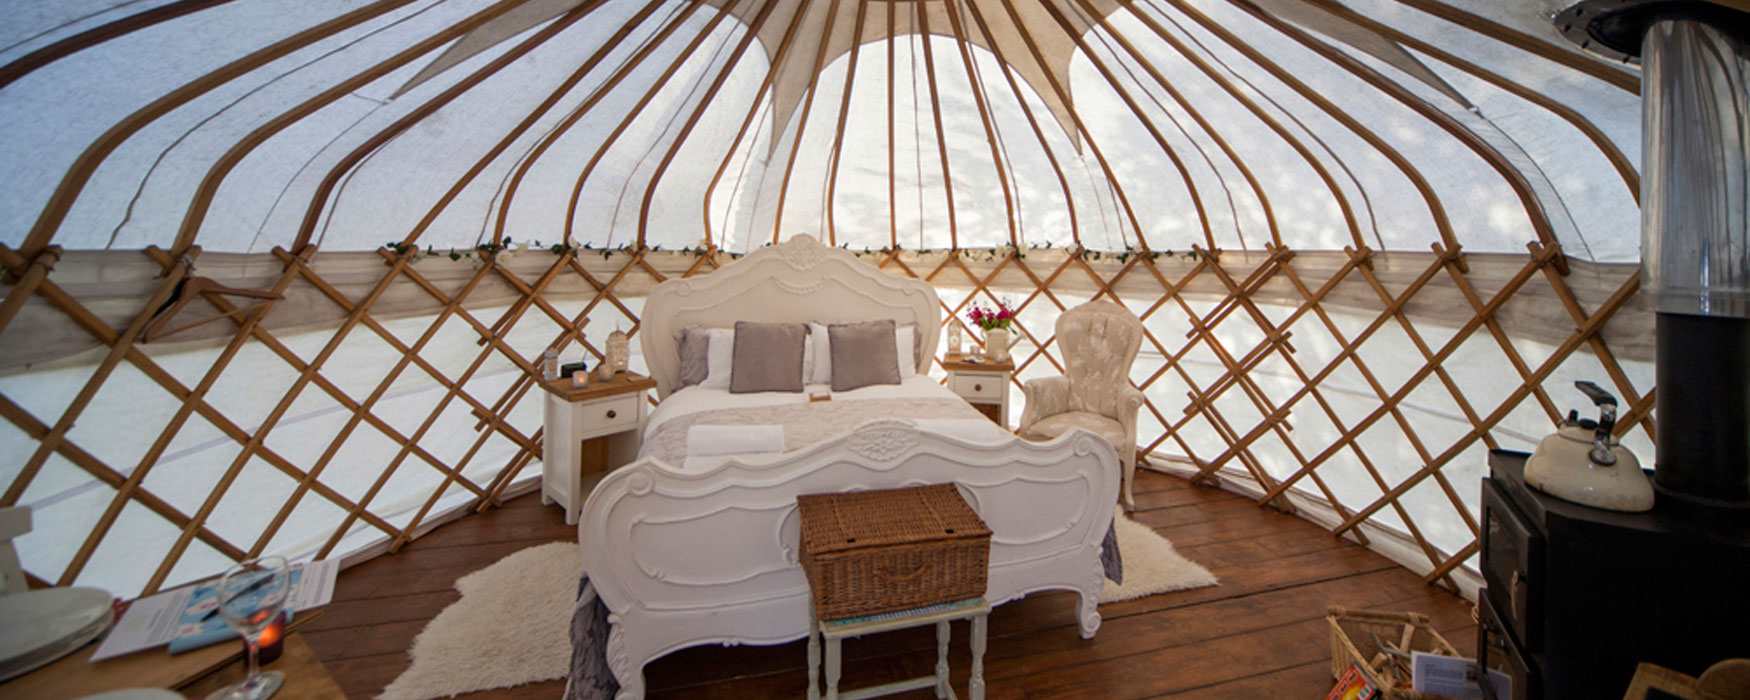 Glamping in luxurious traditional yurts